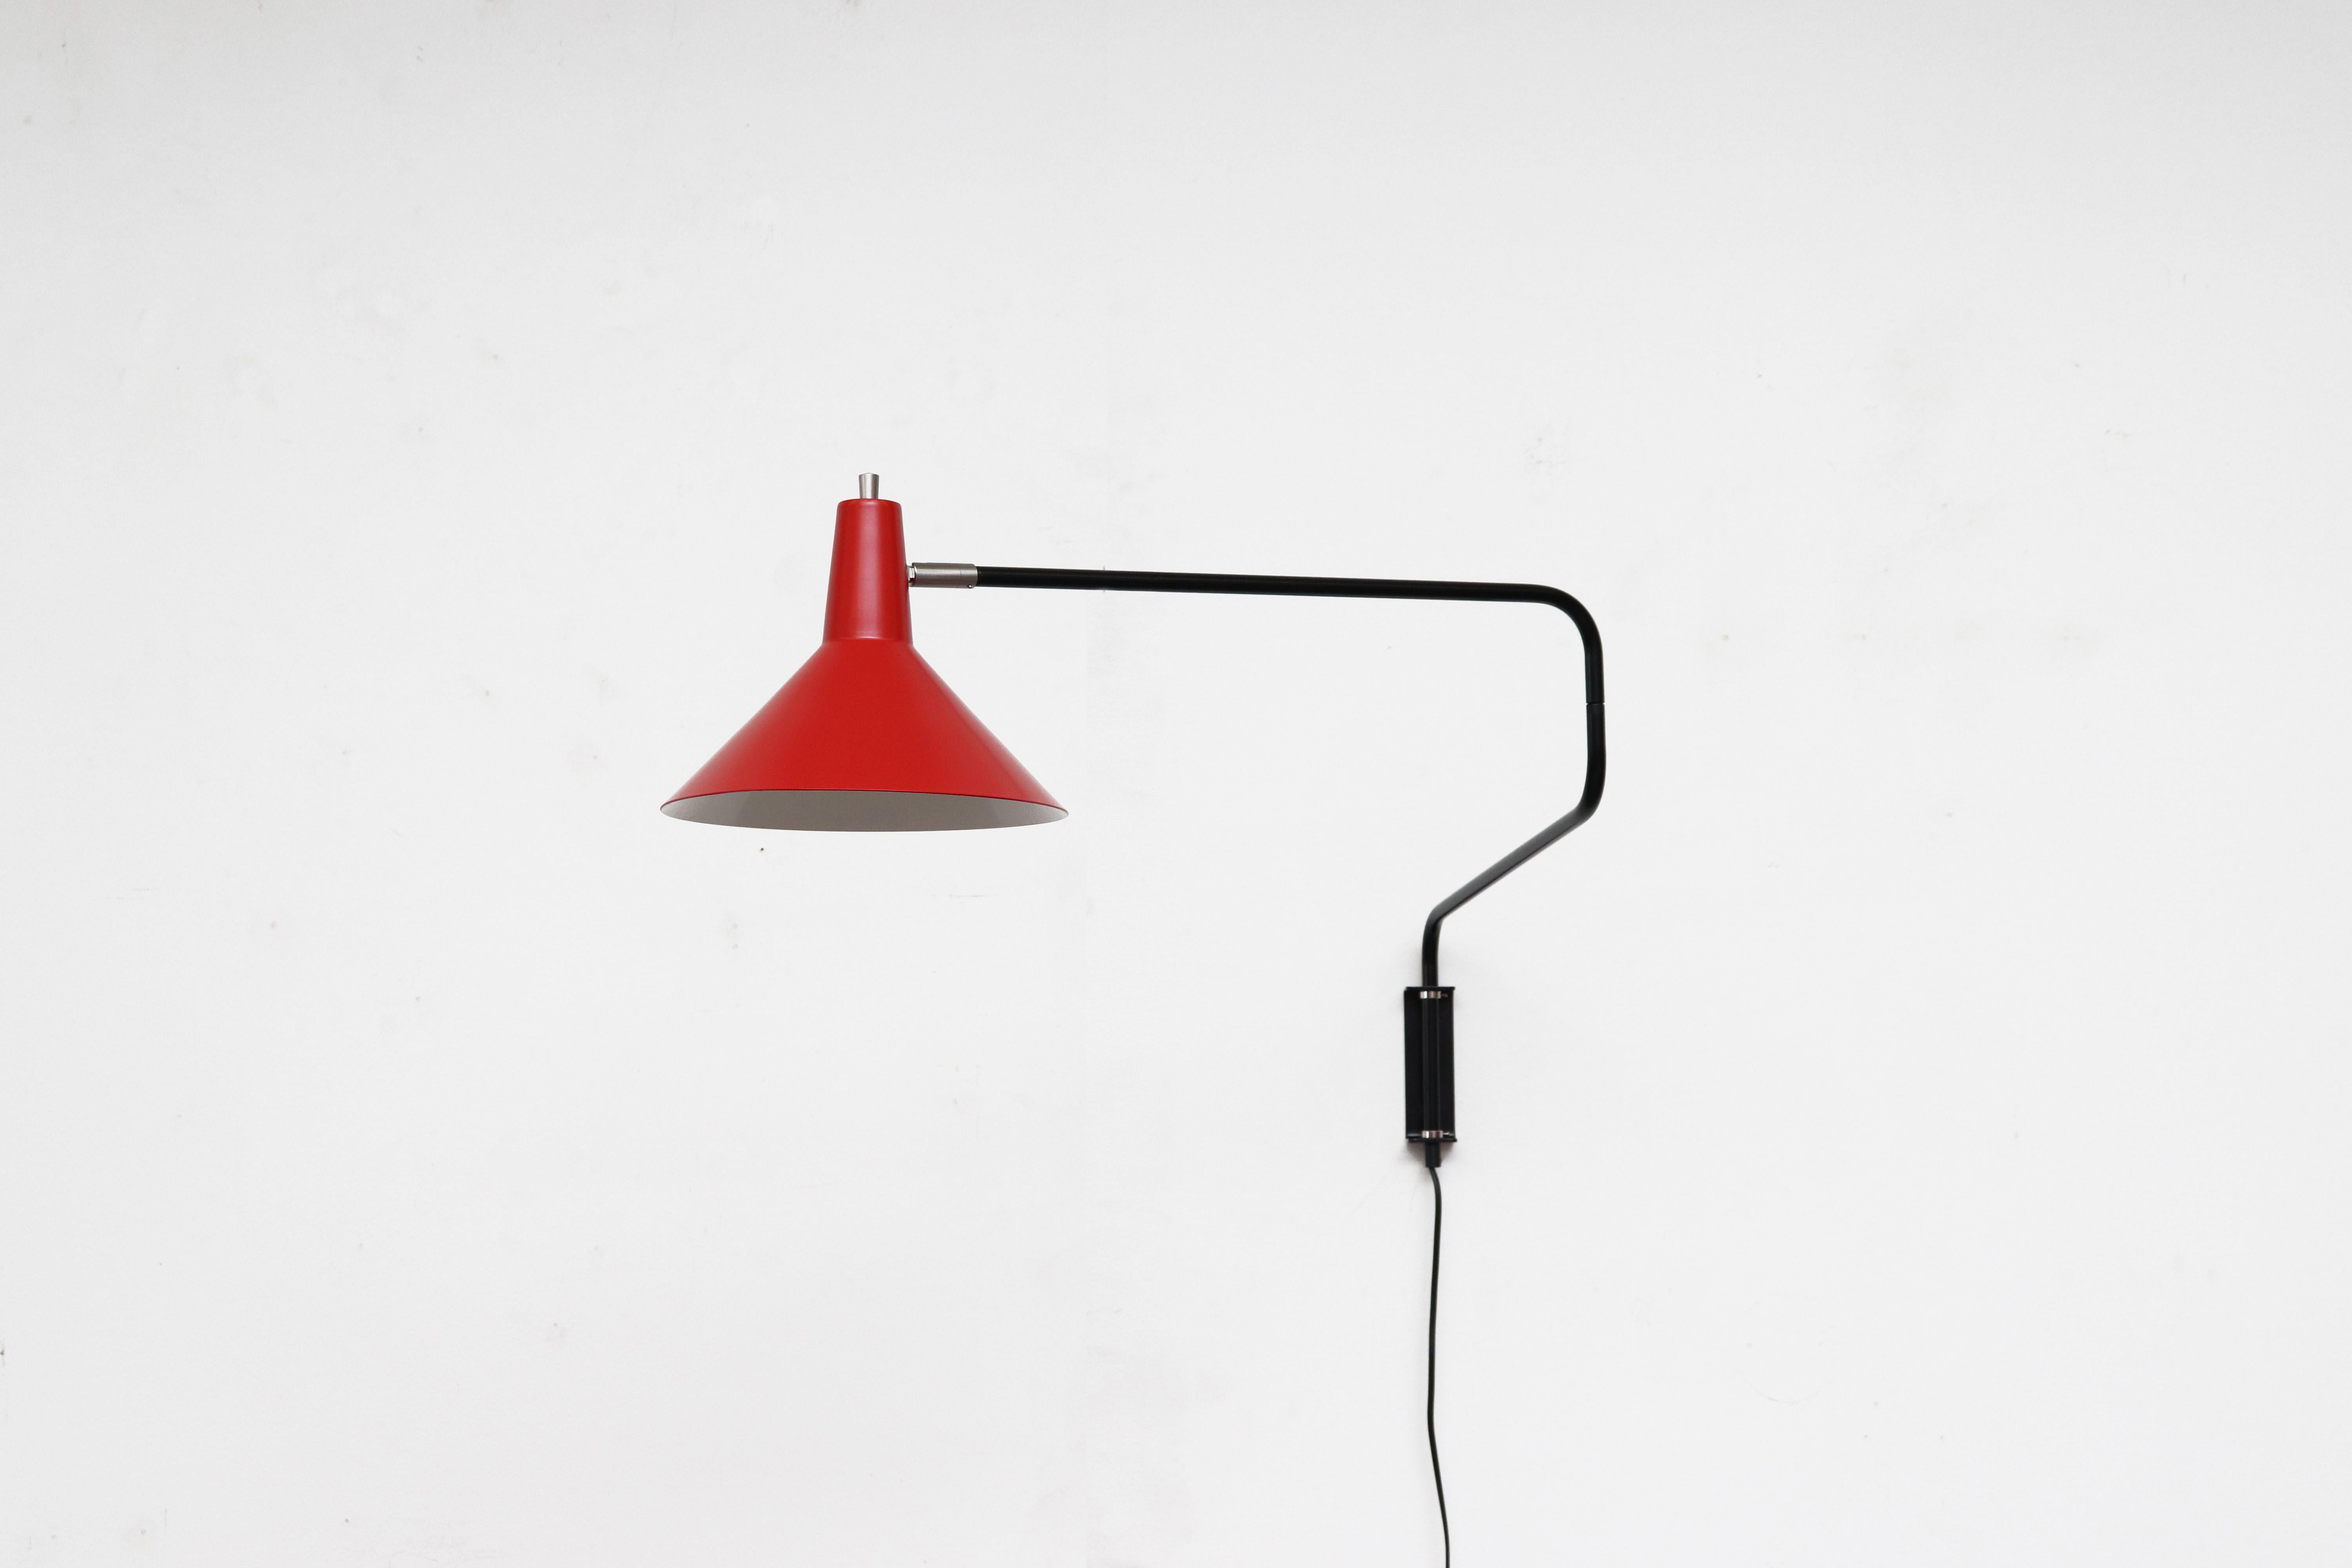 Newly re-issued Anvia 'The Paper Clip' wall lamp in red with black frame. Has paper clip style arm that swings to extend or retract for versatile use and tilting/rotating shade. More colors available, listed separately.